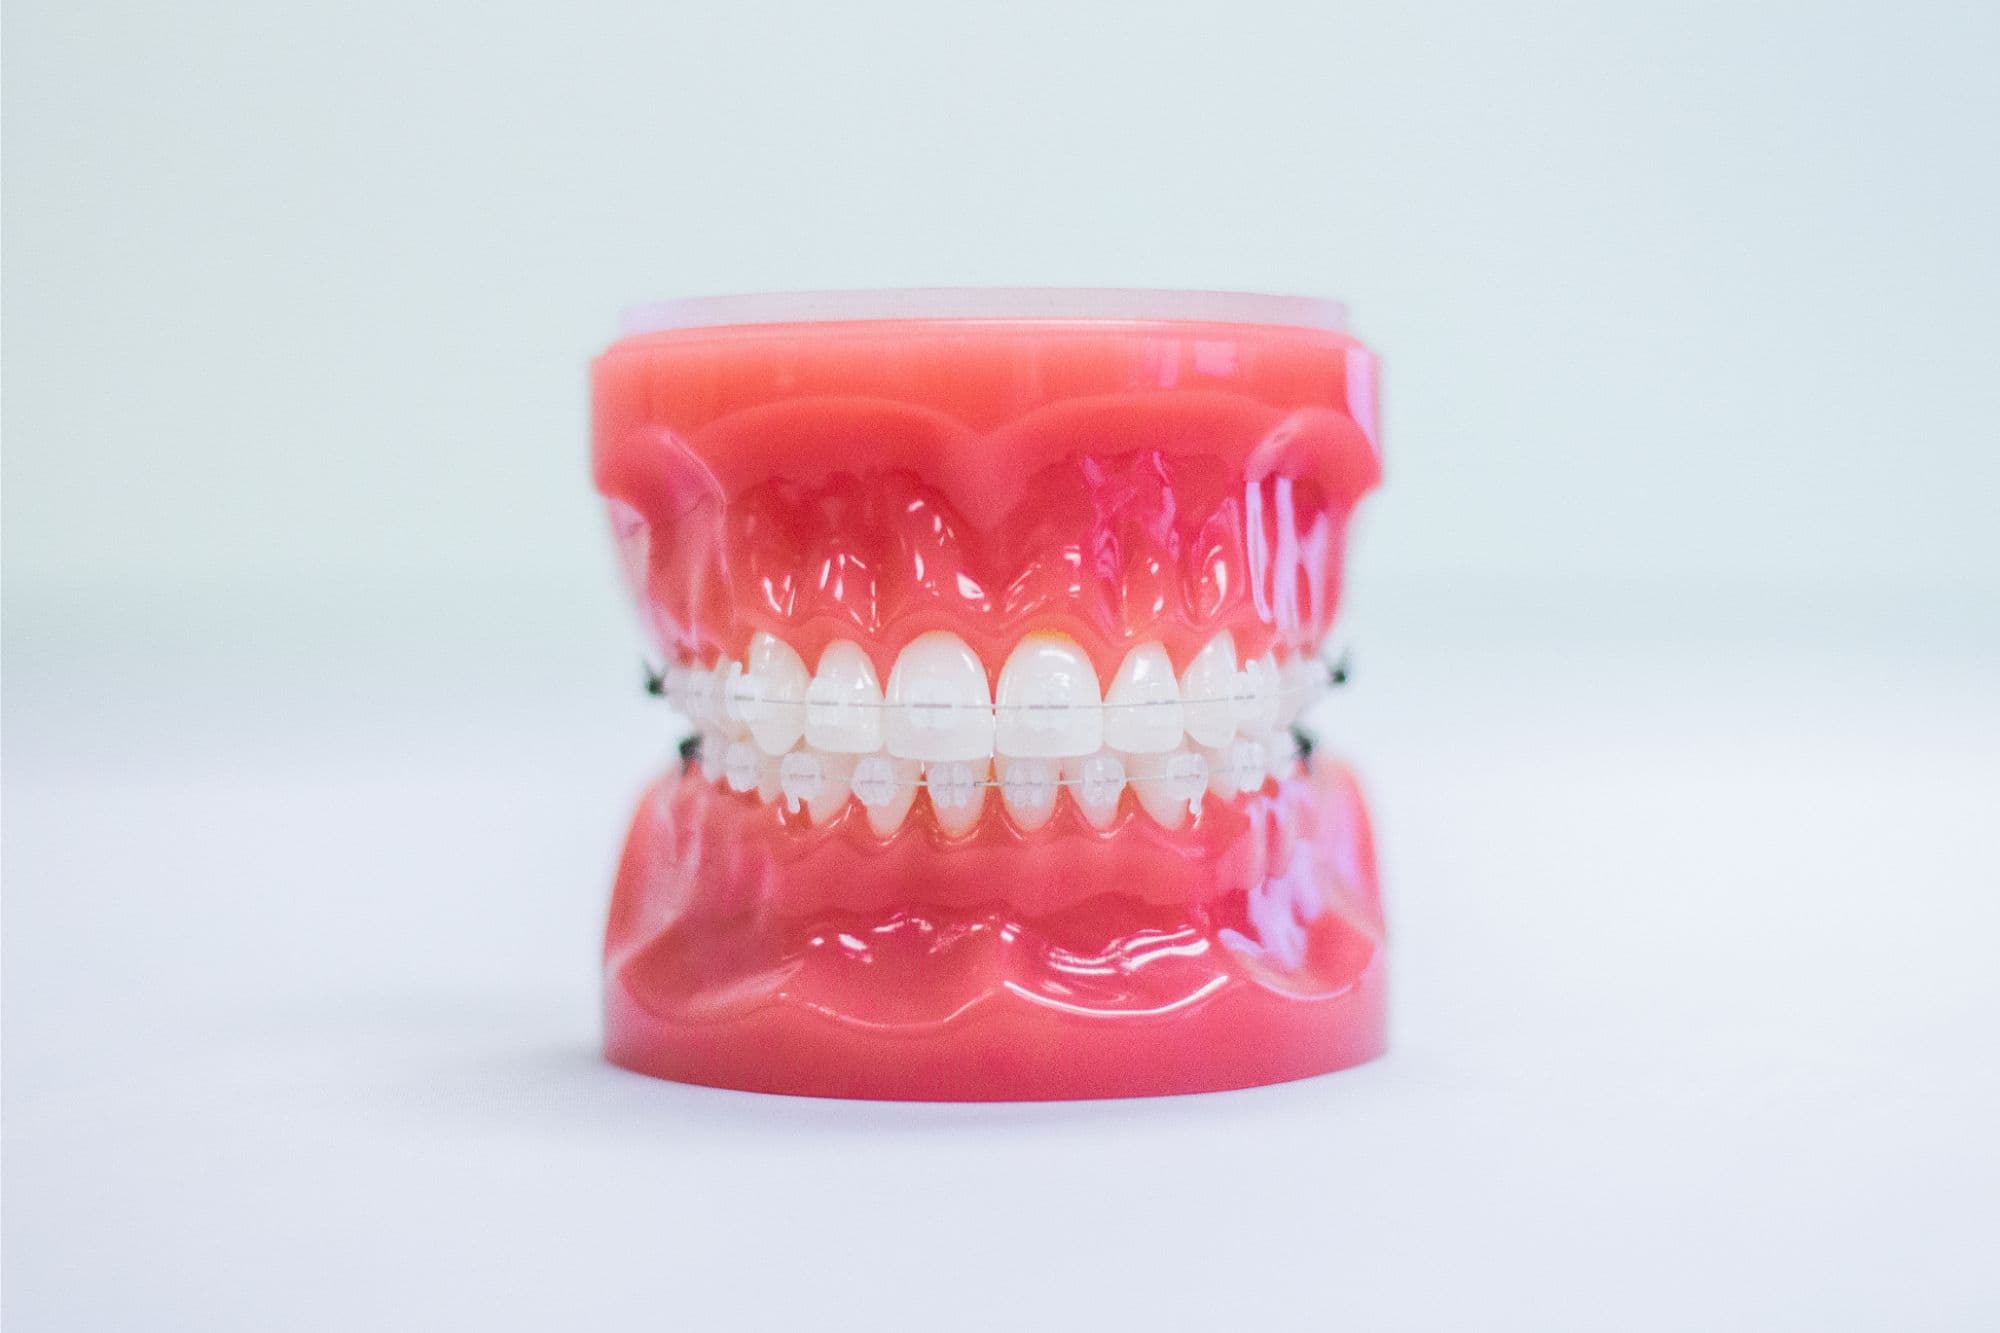 clear braces on a plastic model